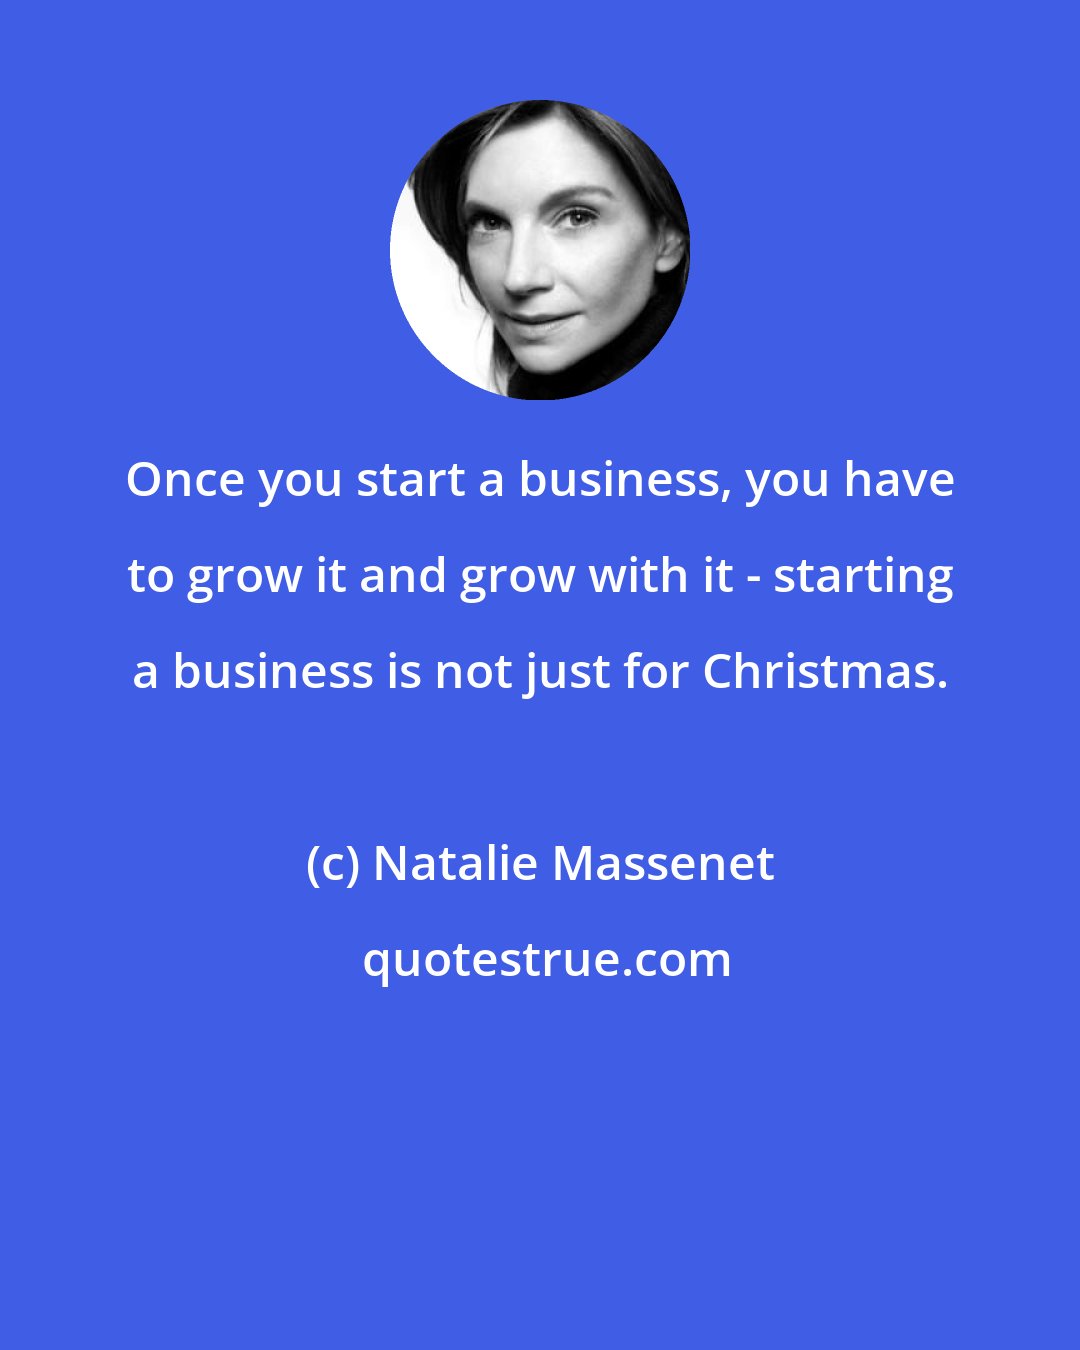 Natalie Massenet: Once you start a business, you have to grow it and grow with it - starting a business is not just for Christmas.